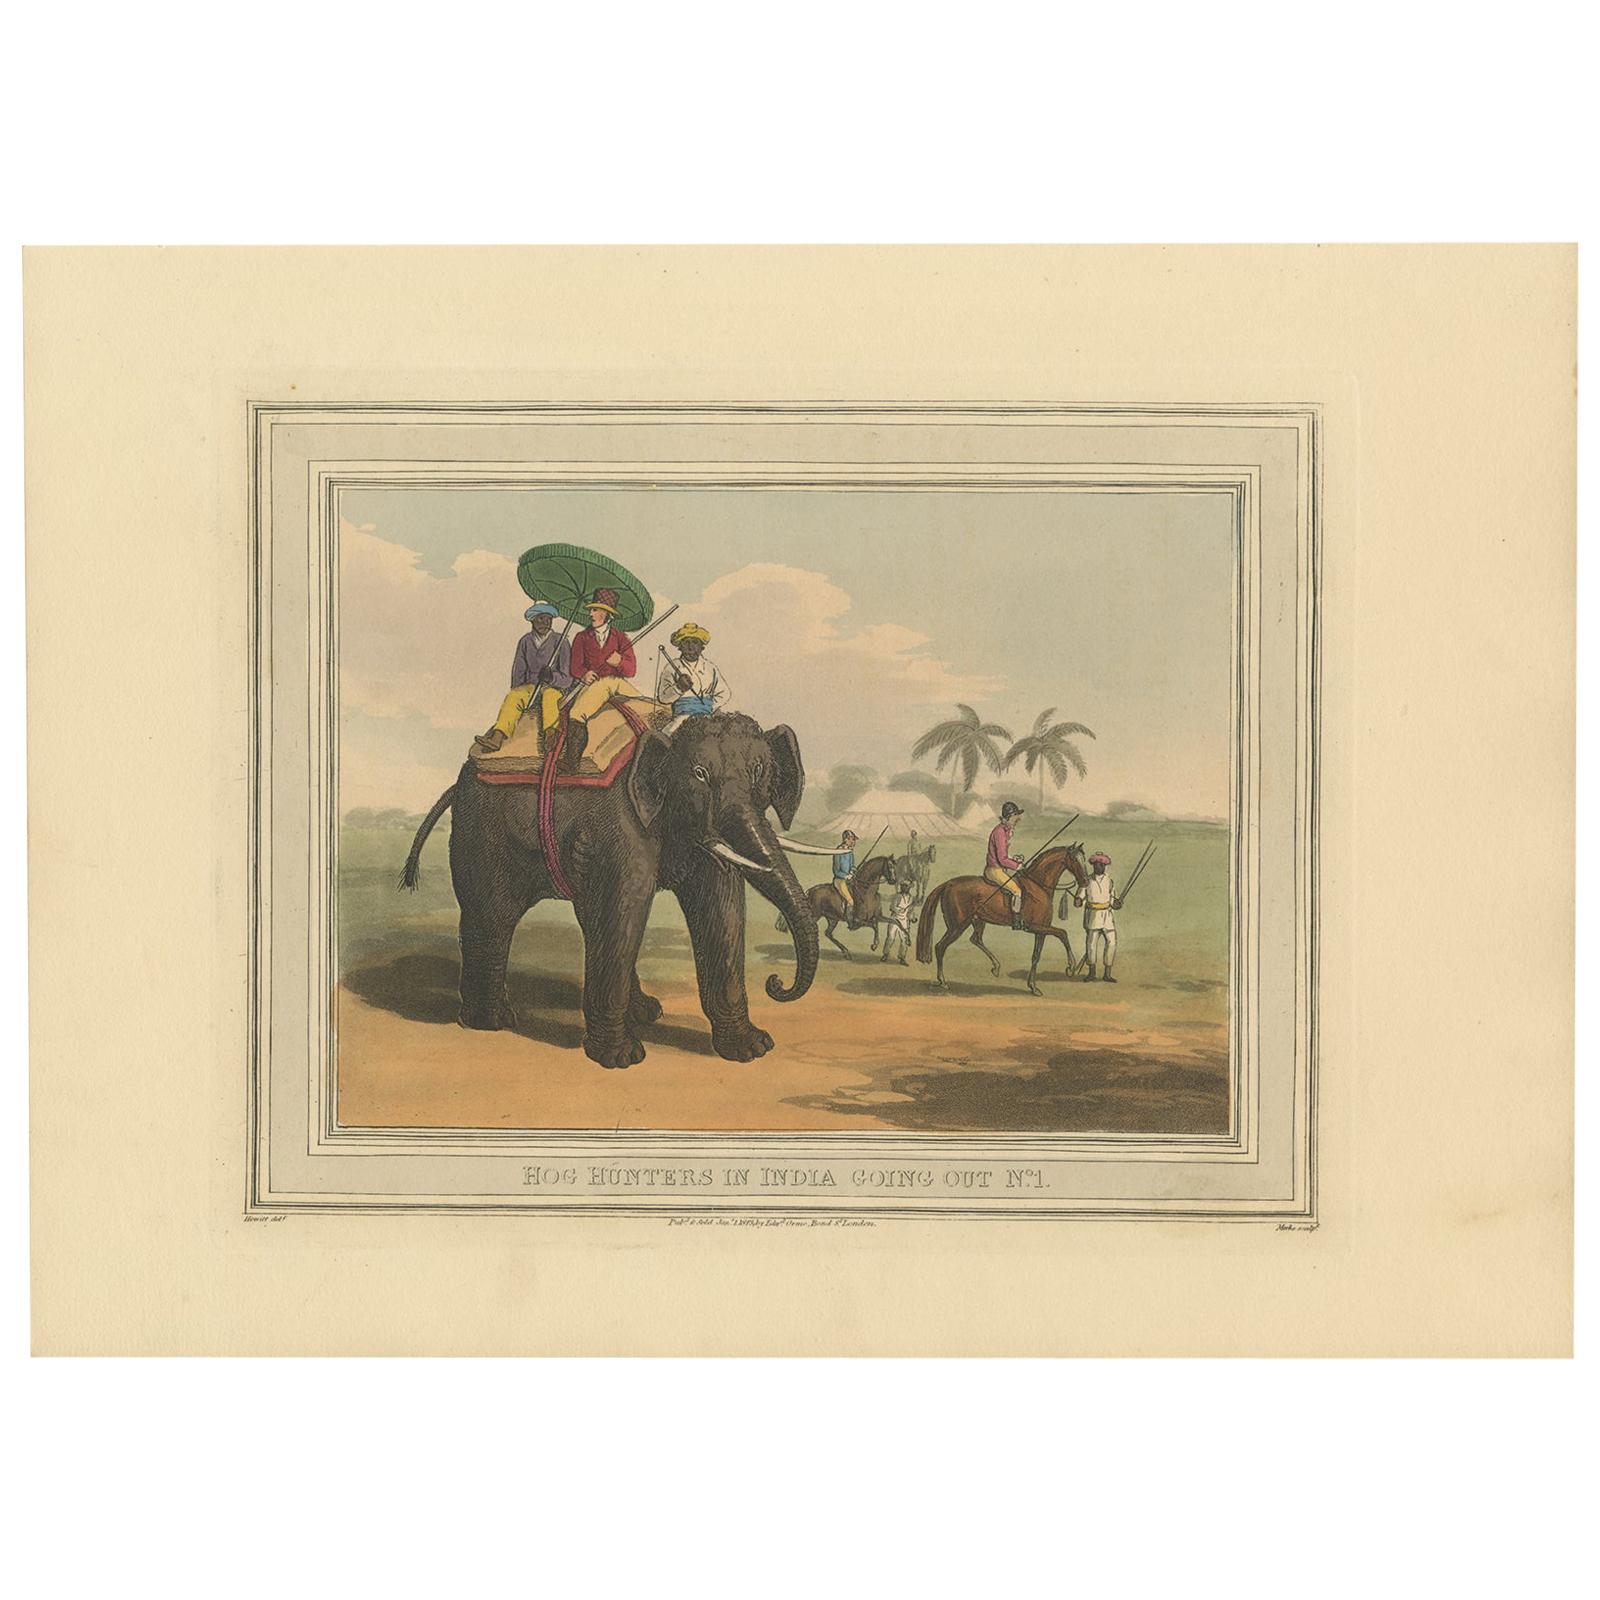 Antique Print of Hog Hunting in India by Williamson, 1819